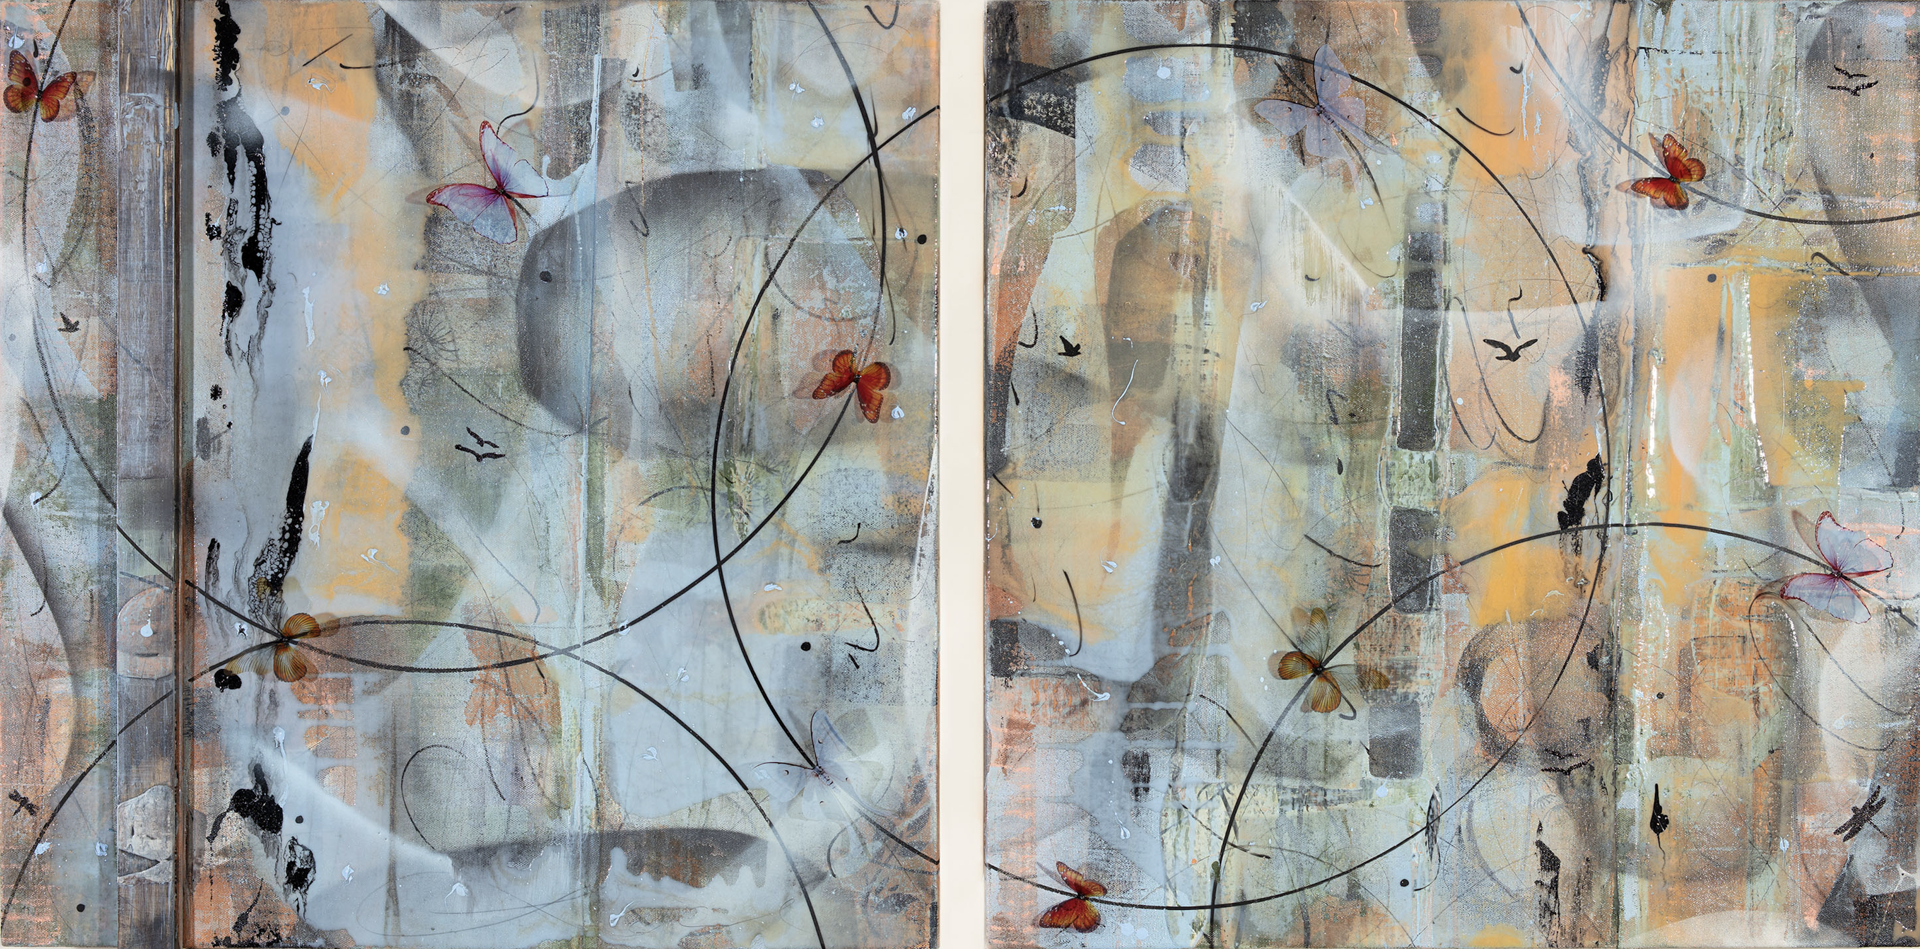 Within the Circle (Diptych) by Ingrid Dee Magidson